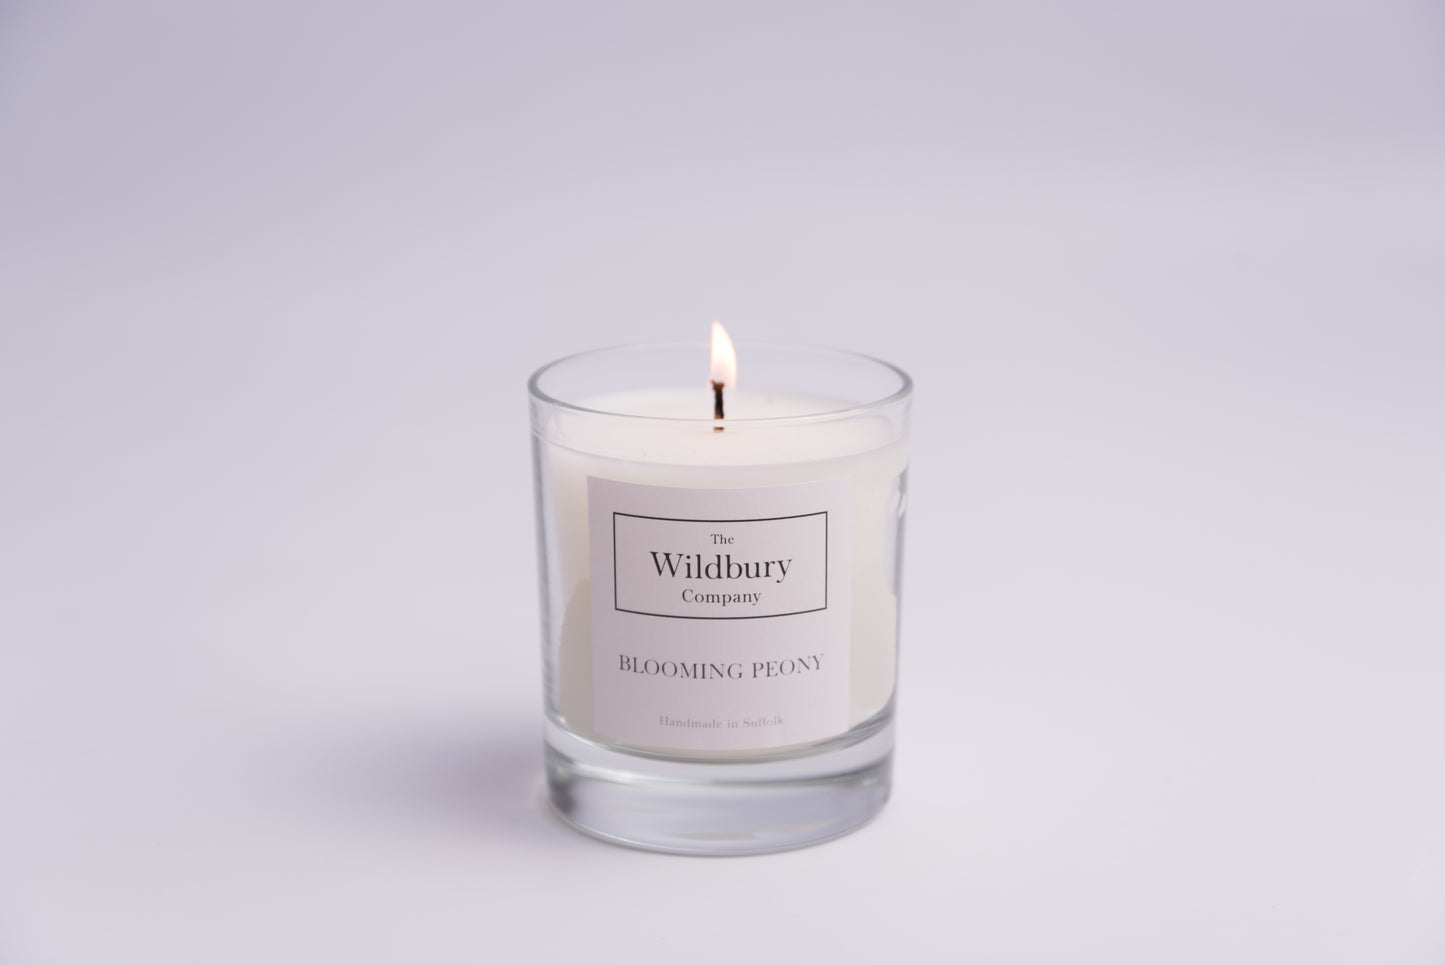 The Wildbury Company Single Wick Signature Candle in Glass burning with flame and label on the glass.